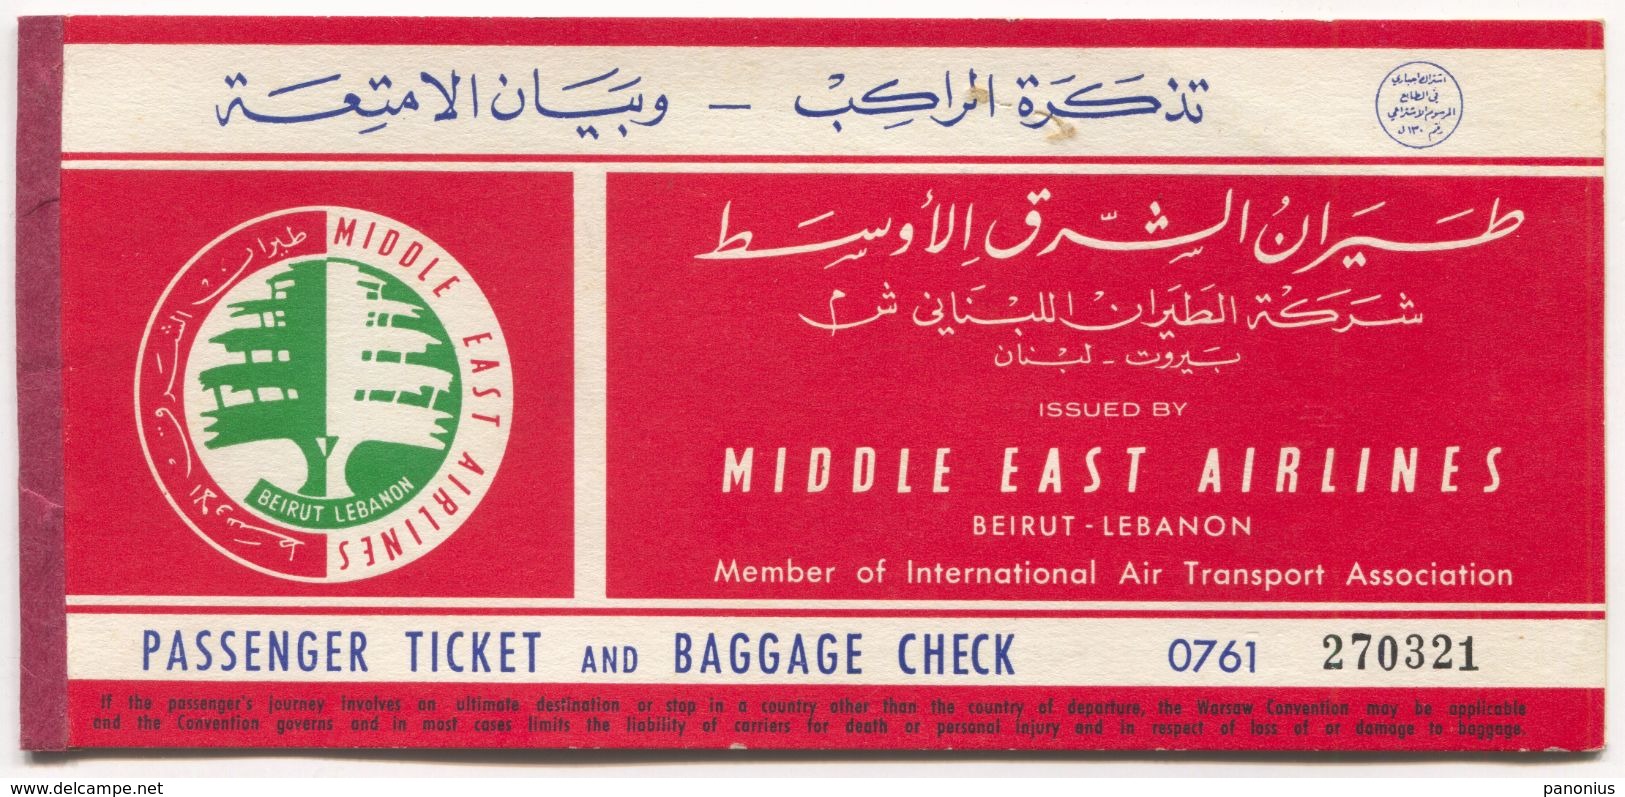 MEA /  MIDDLE EAST AIRLINES - BEIRUT LEBANON LIBAN, PASSENGER TICKET & BAGGAGE CHECK, BILLET COUPON, Year 1961 - Biglietti